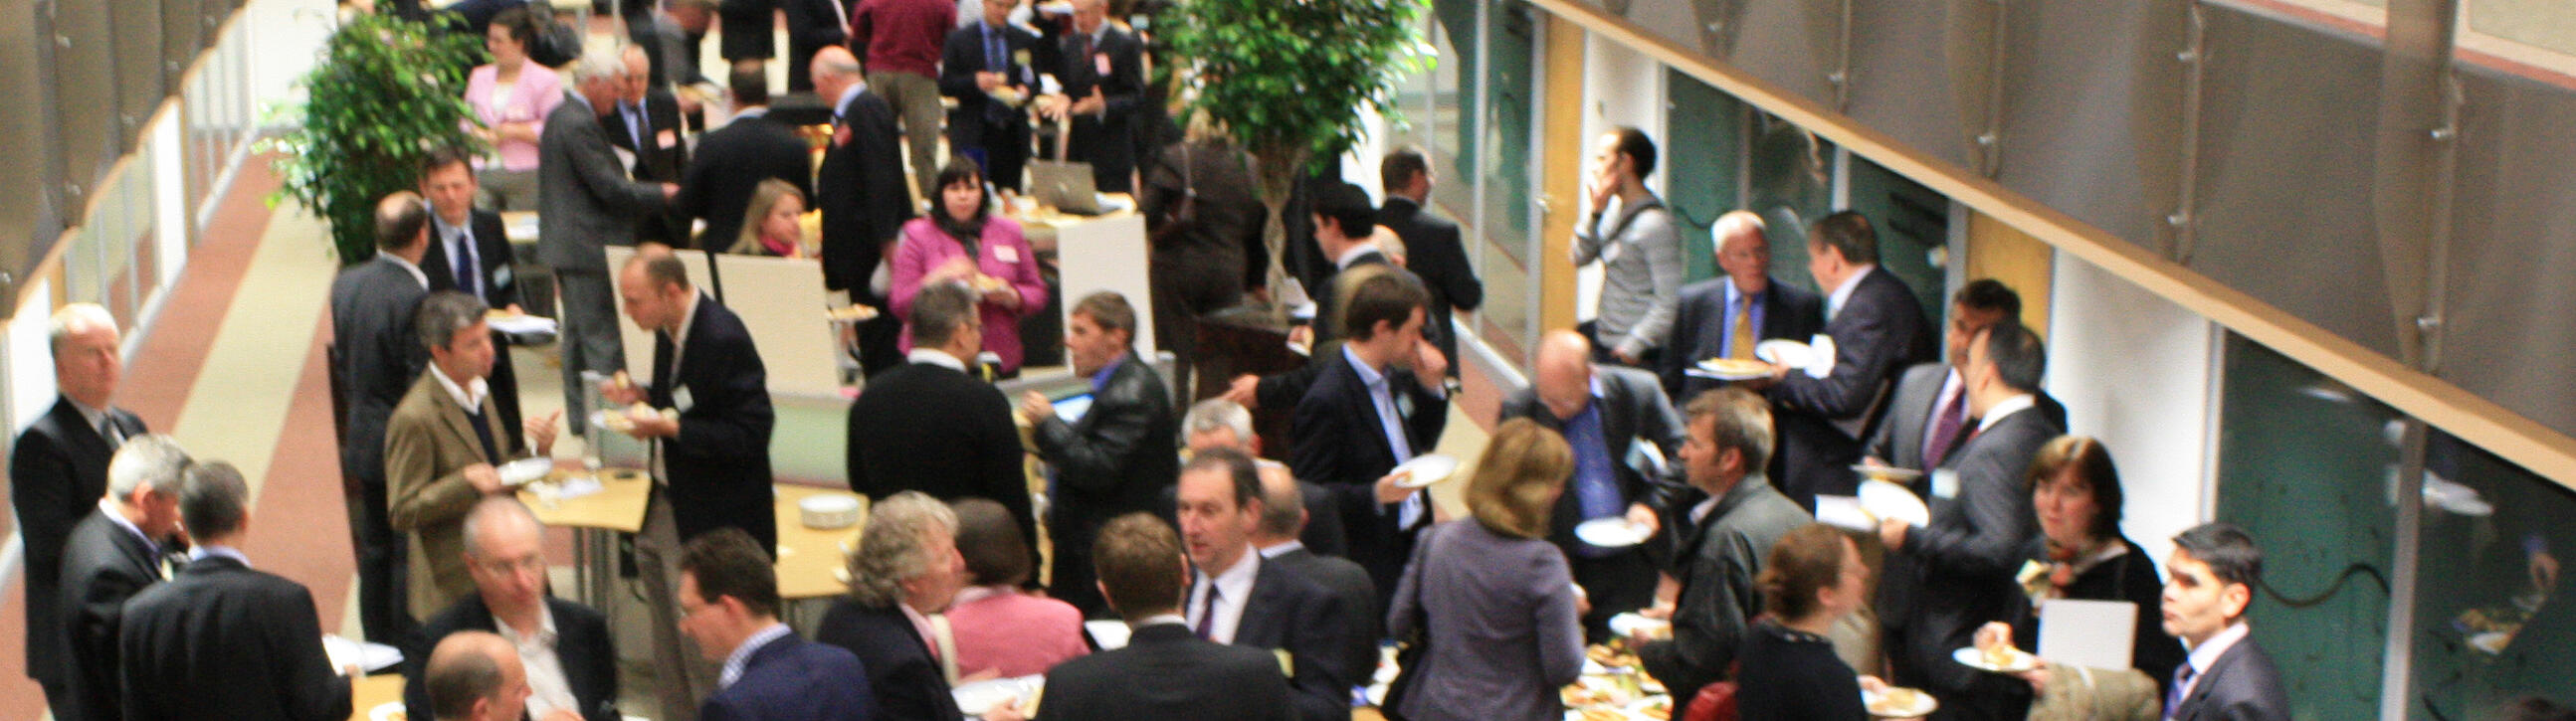 networking_events_carrwood